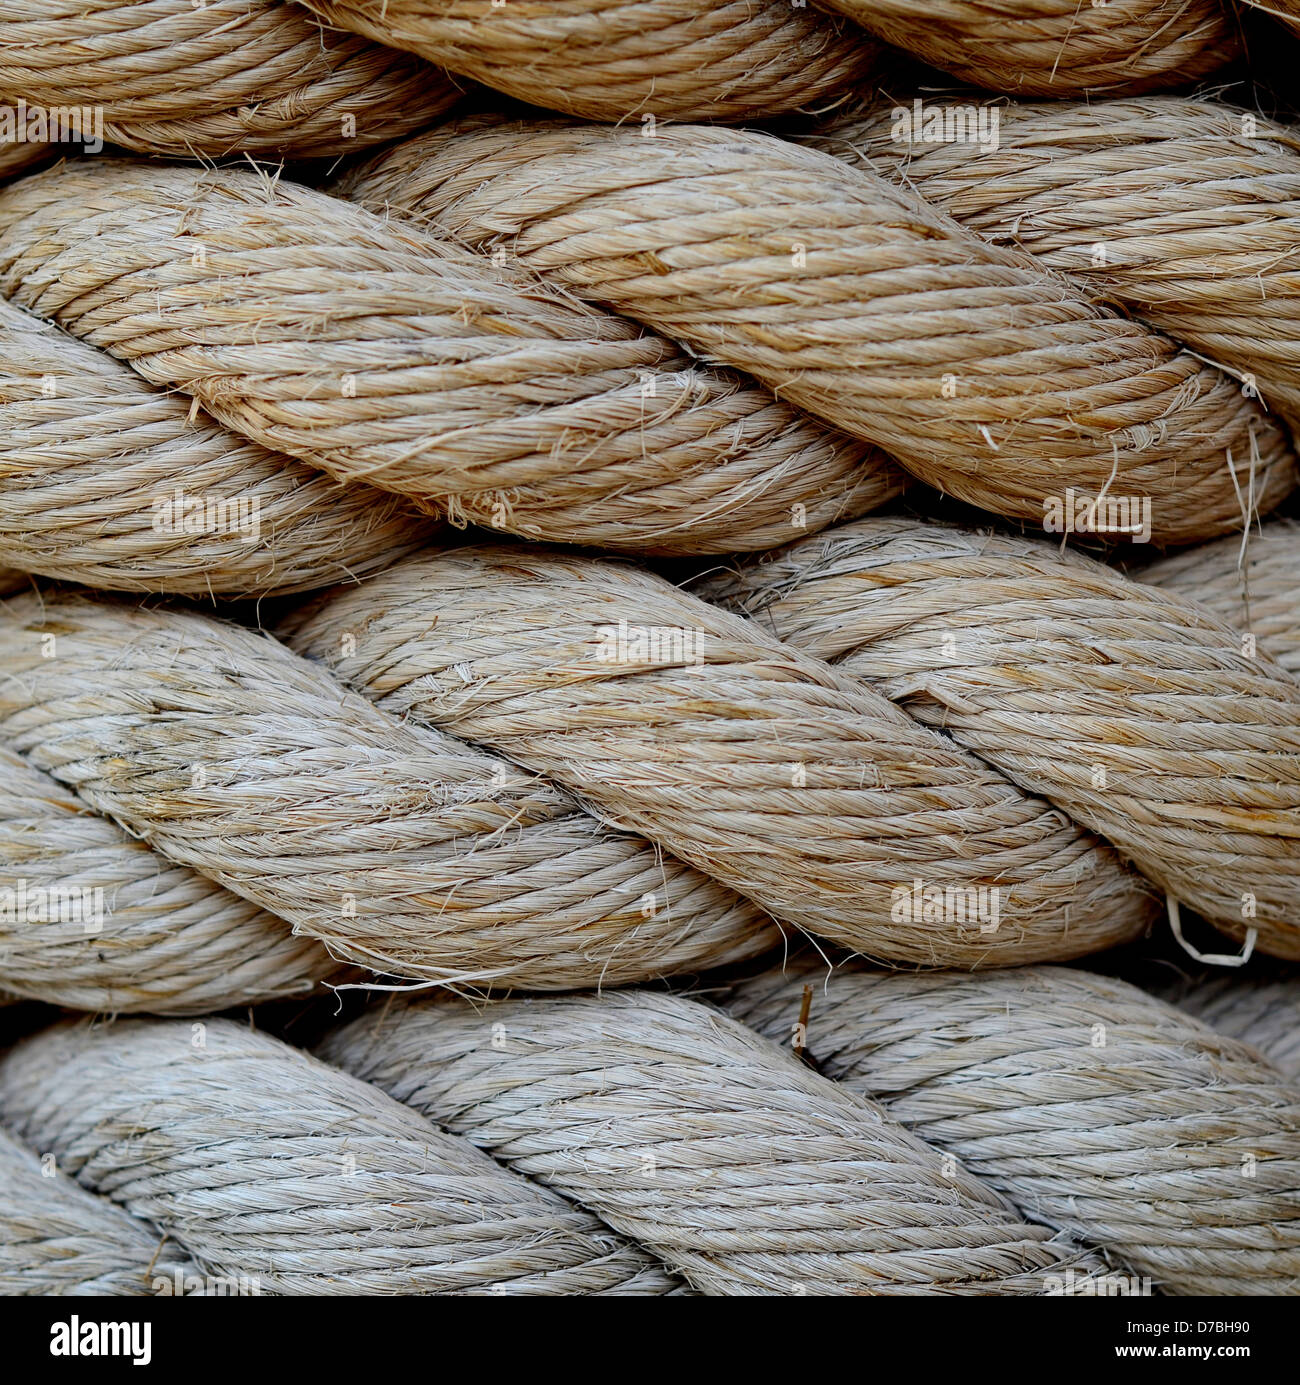 Grungy Old Rope Stock Photo